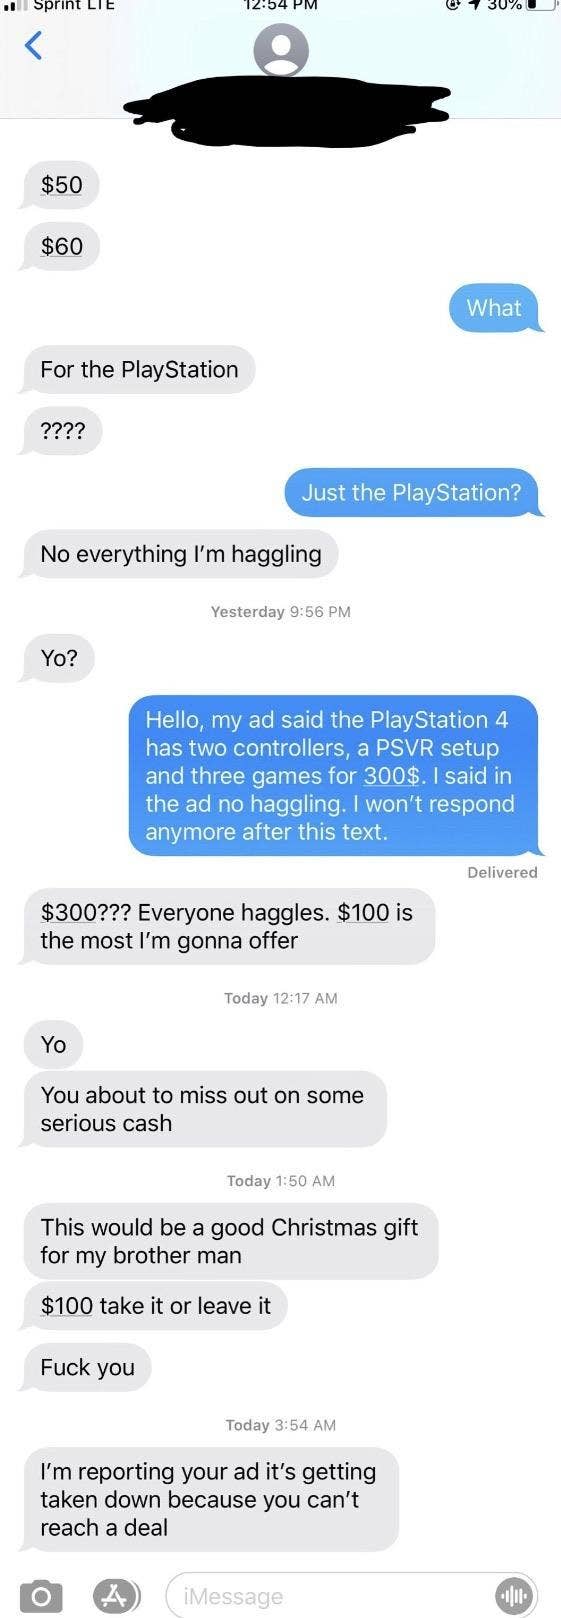 "Not everything I'm haggling"